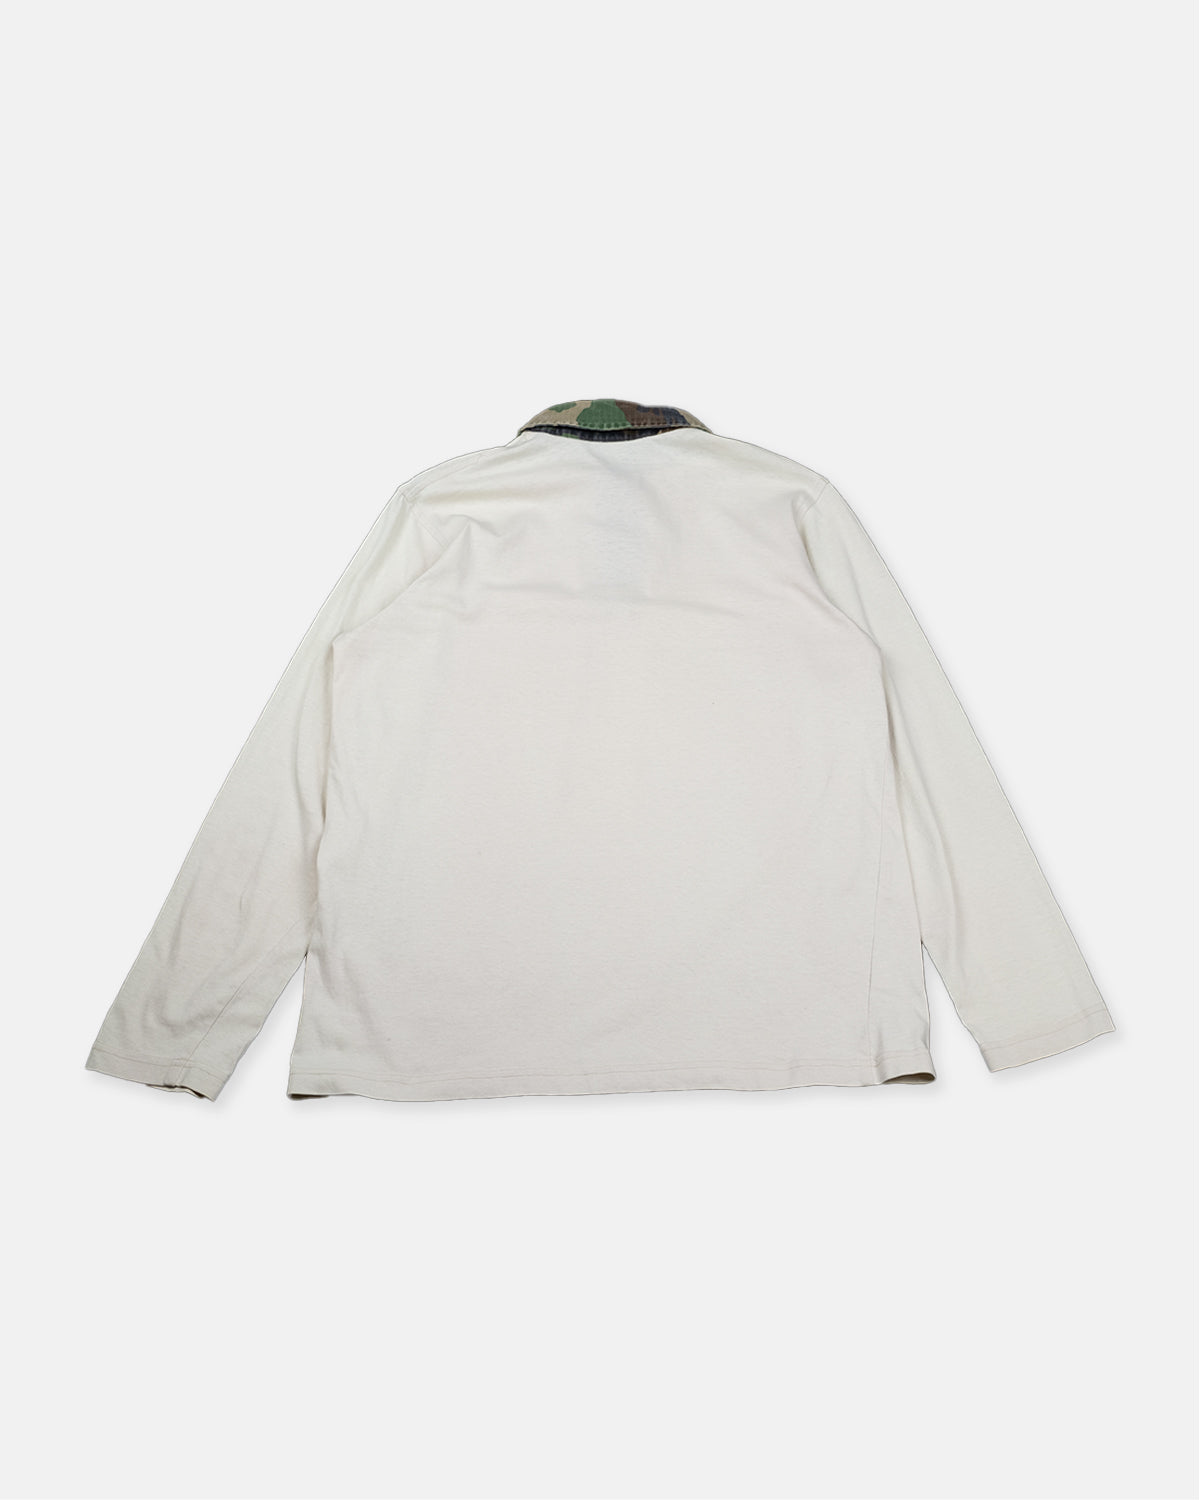 Stüssy Outdoor White/Camo Rugby Shirt